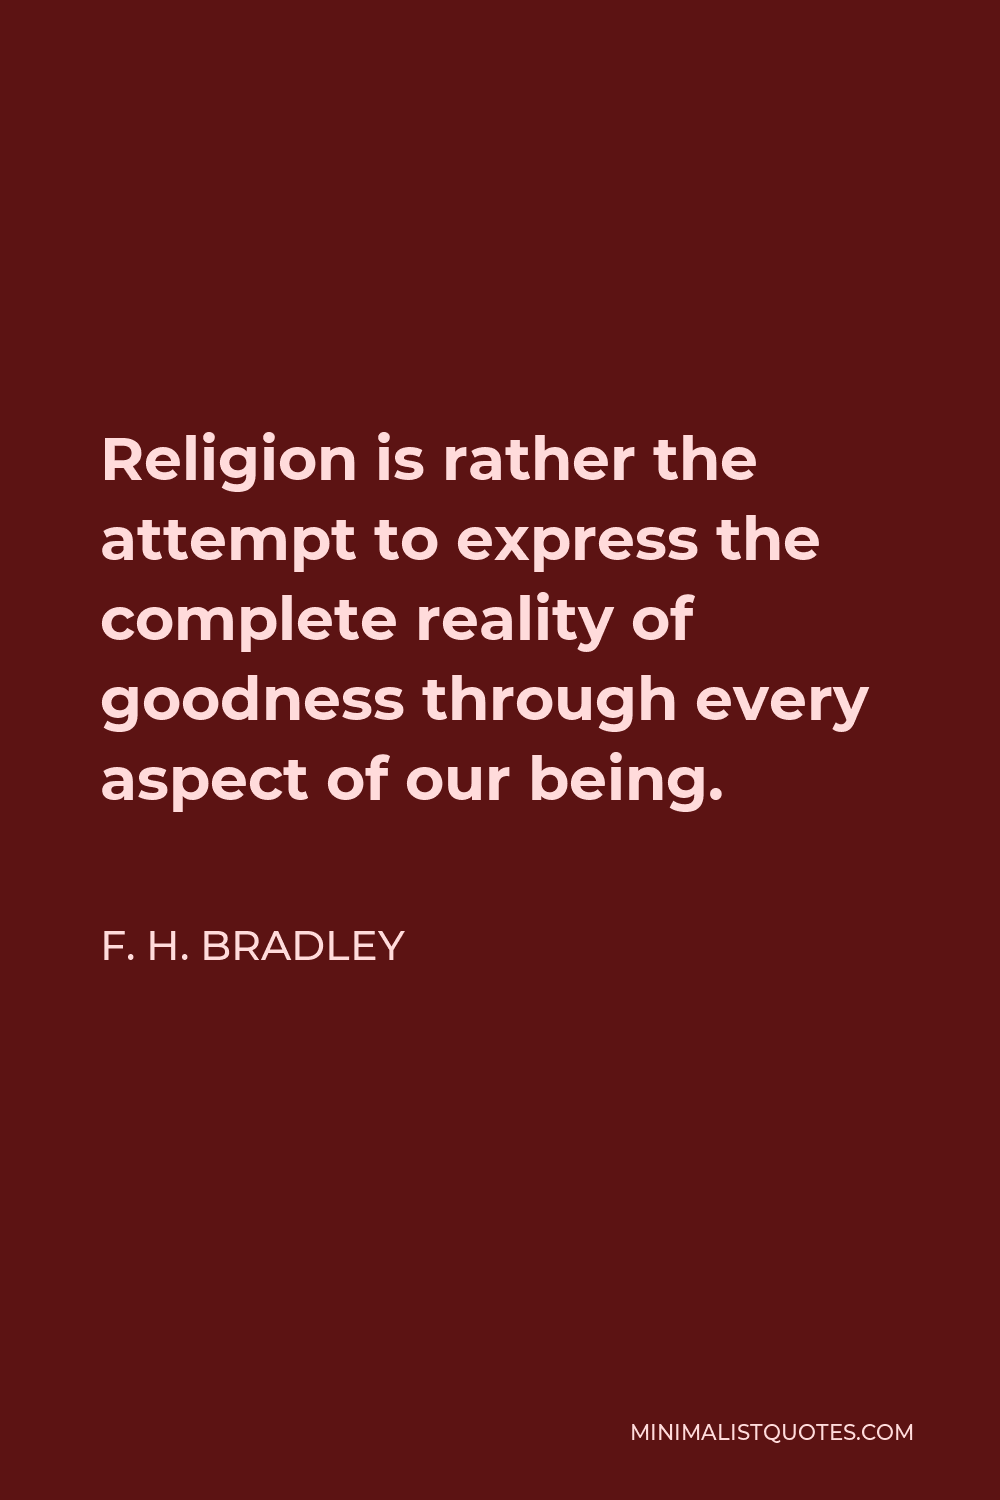 F. H. Bradley Quote - Religion is rather the attempt to express the complete reality of goodness through every aspect of our being.